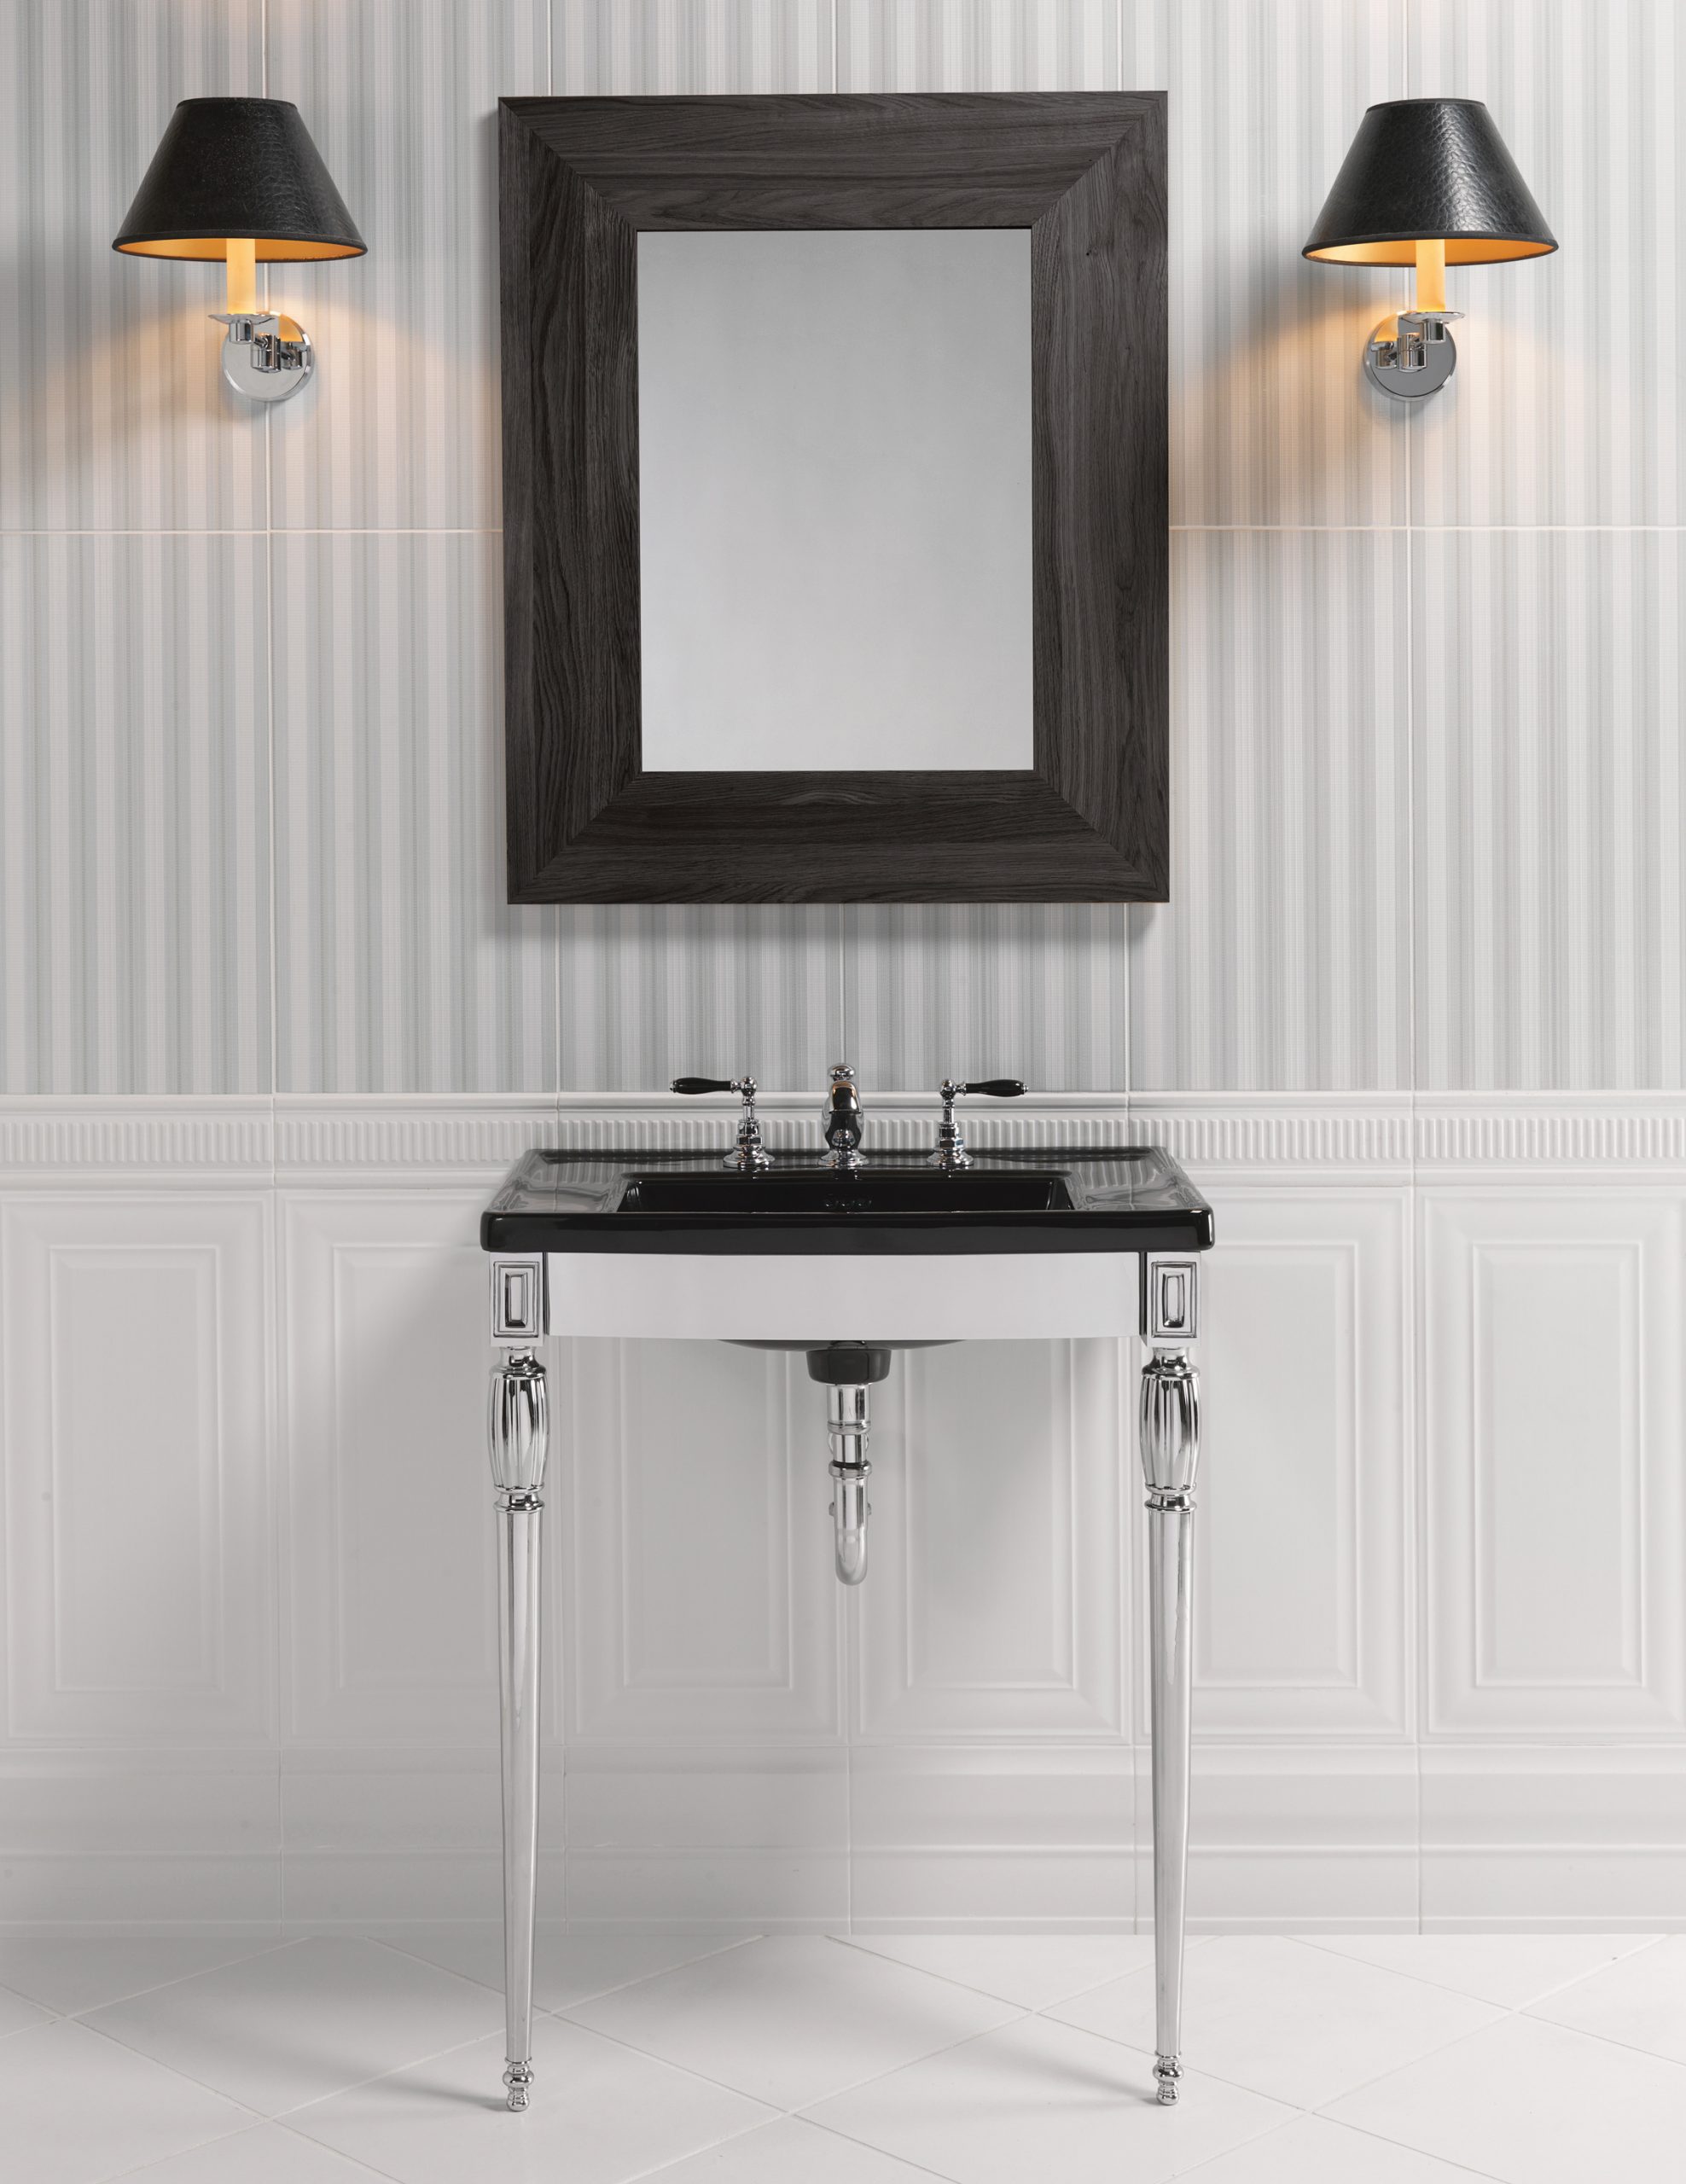 The new Imperial Bathrooms Black Sapphire Collection @UK_Bathrooms